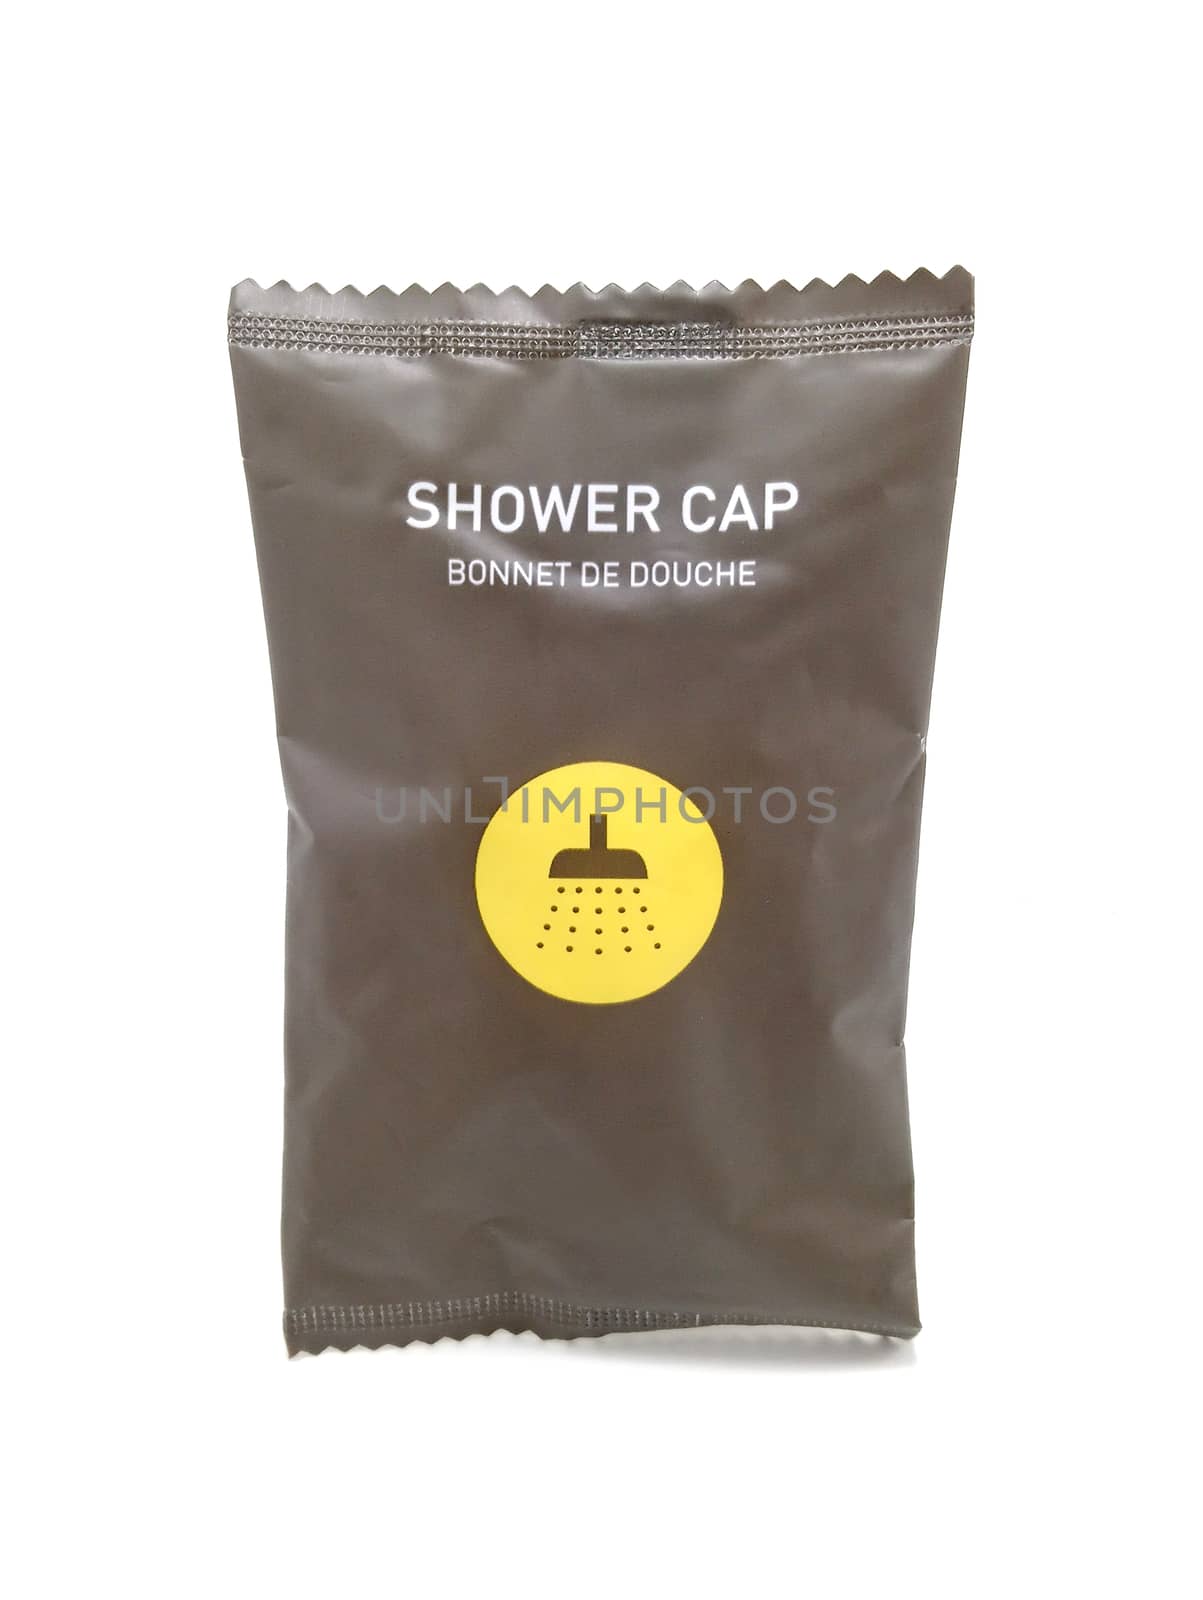 Shower cap small pack hotel complimentary  by imwaltersy